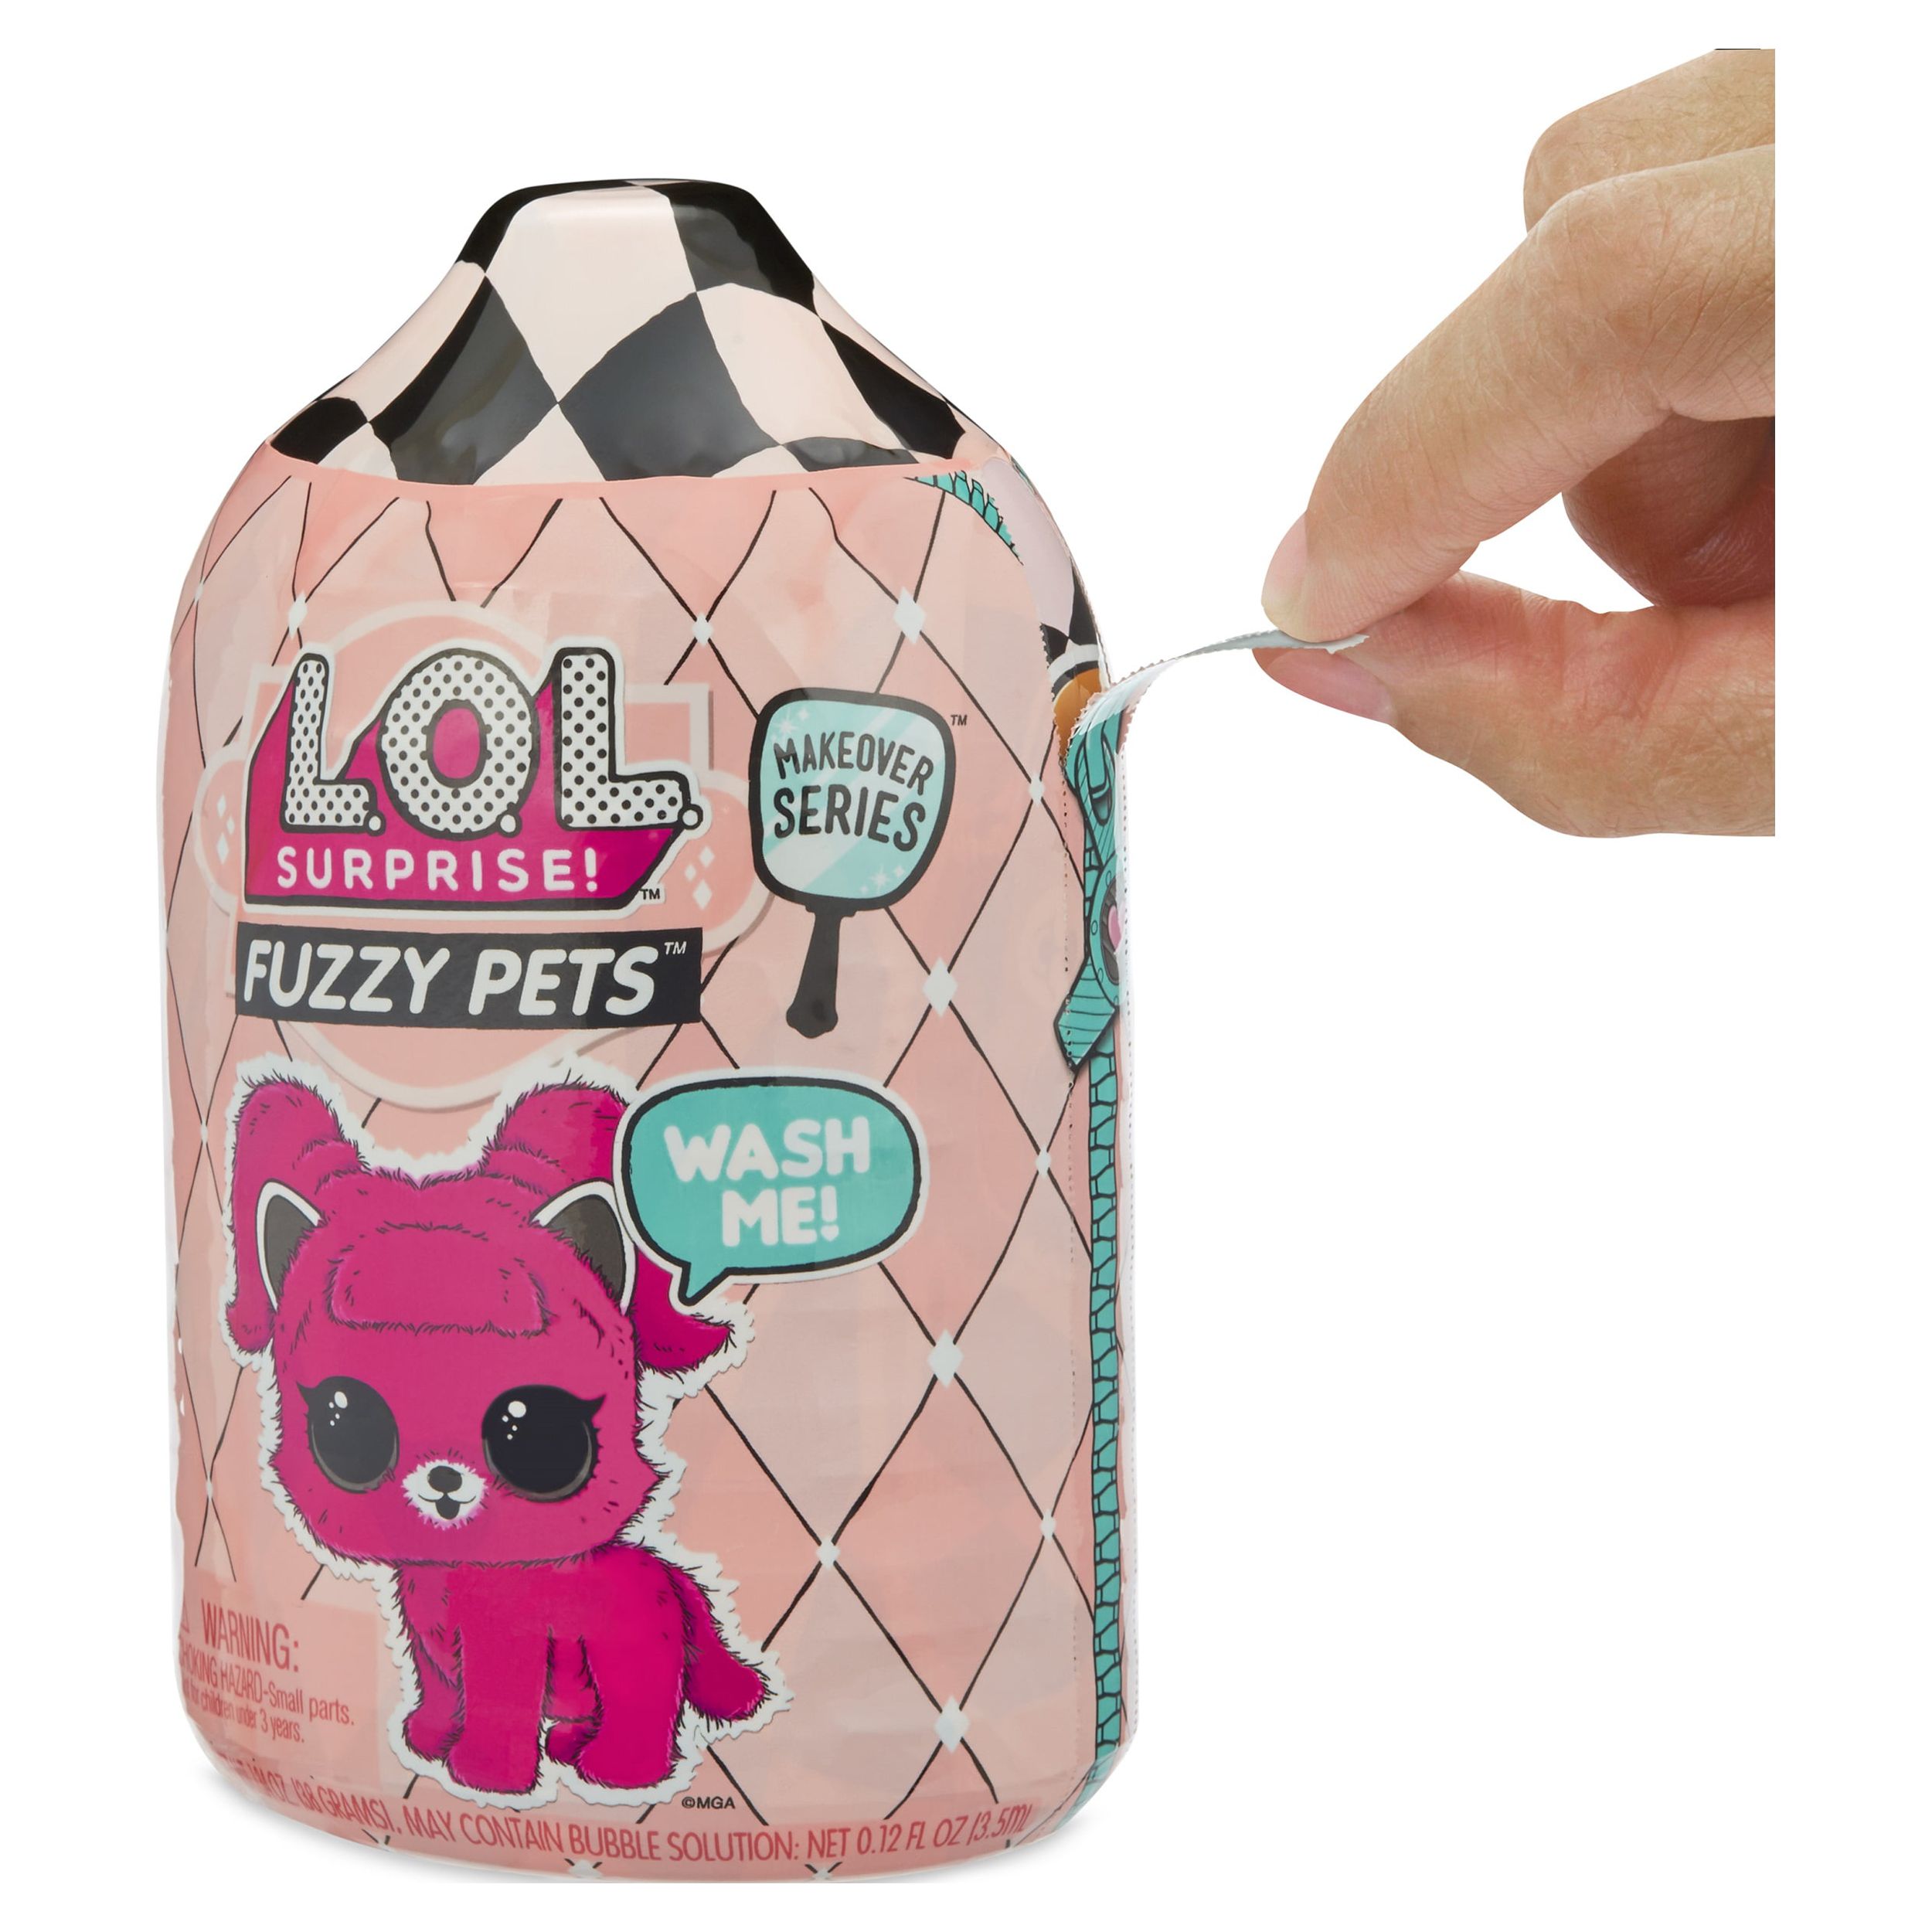 LOL Surprise Fuzzy Pets With Washable Fuzz and Water Surprises, Great Gift for Kids Ages 4 5 6+ - image 5 of 6